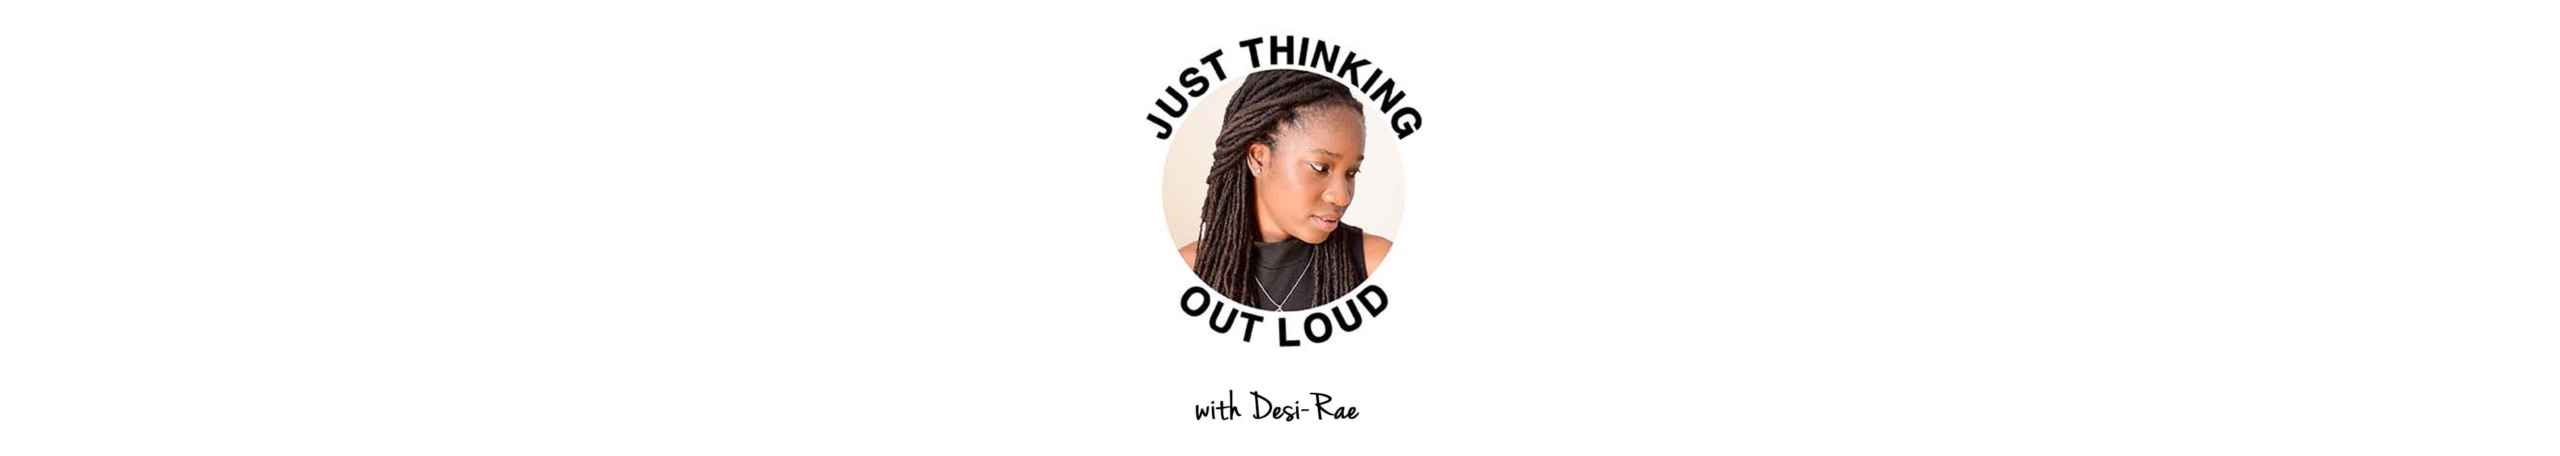 Just Thinking Out Loud with Desi-Rae Logo